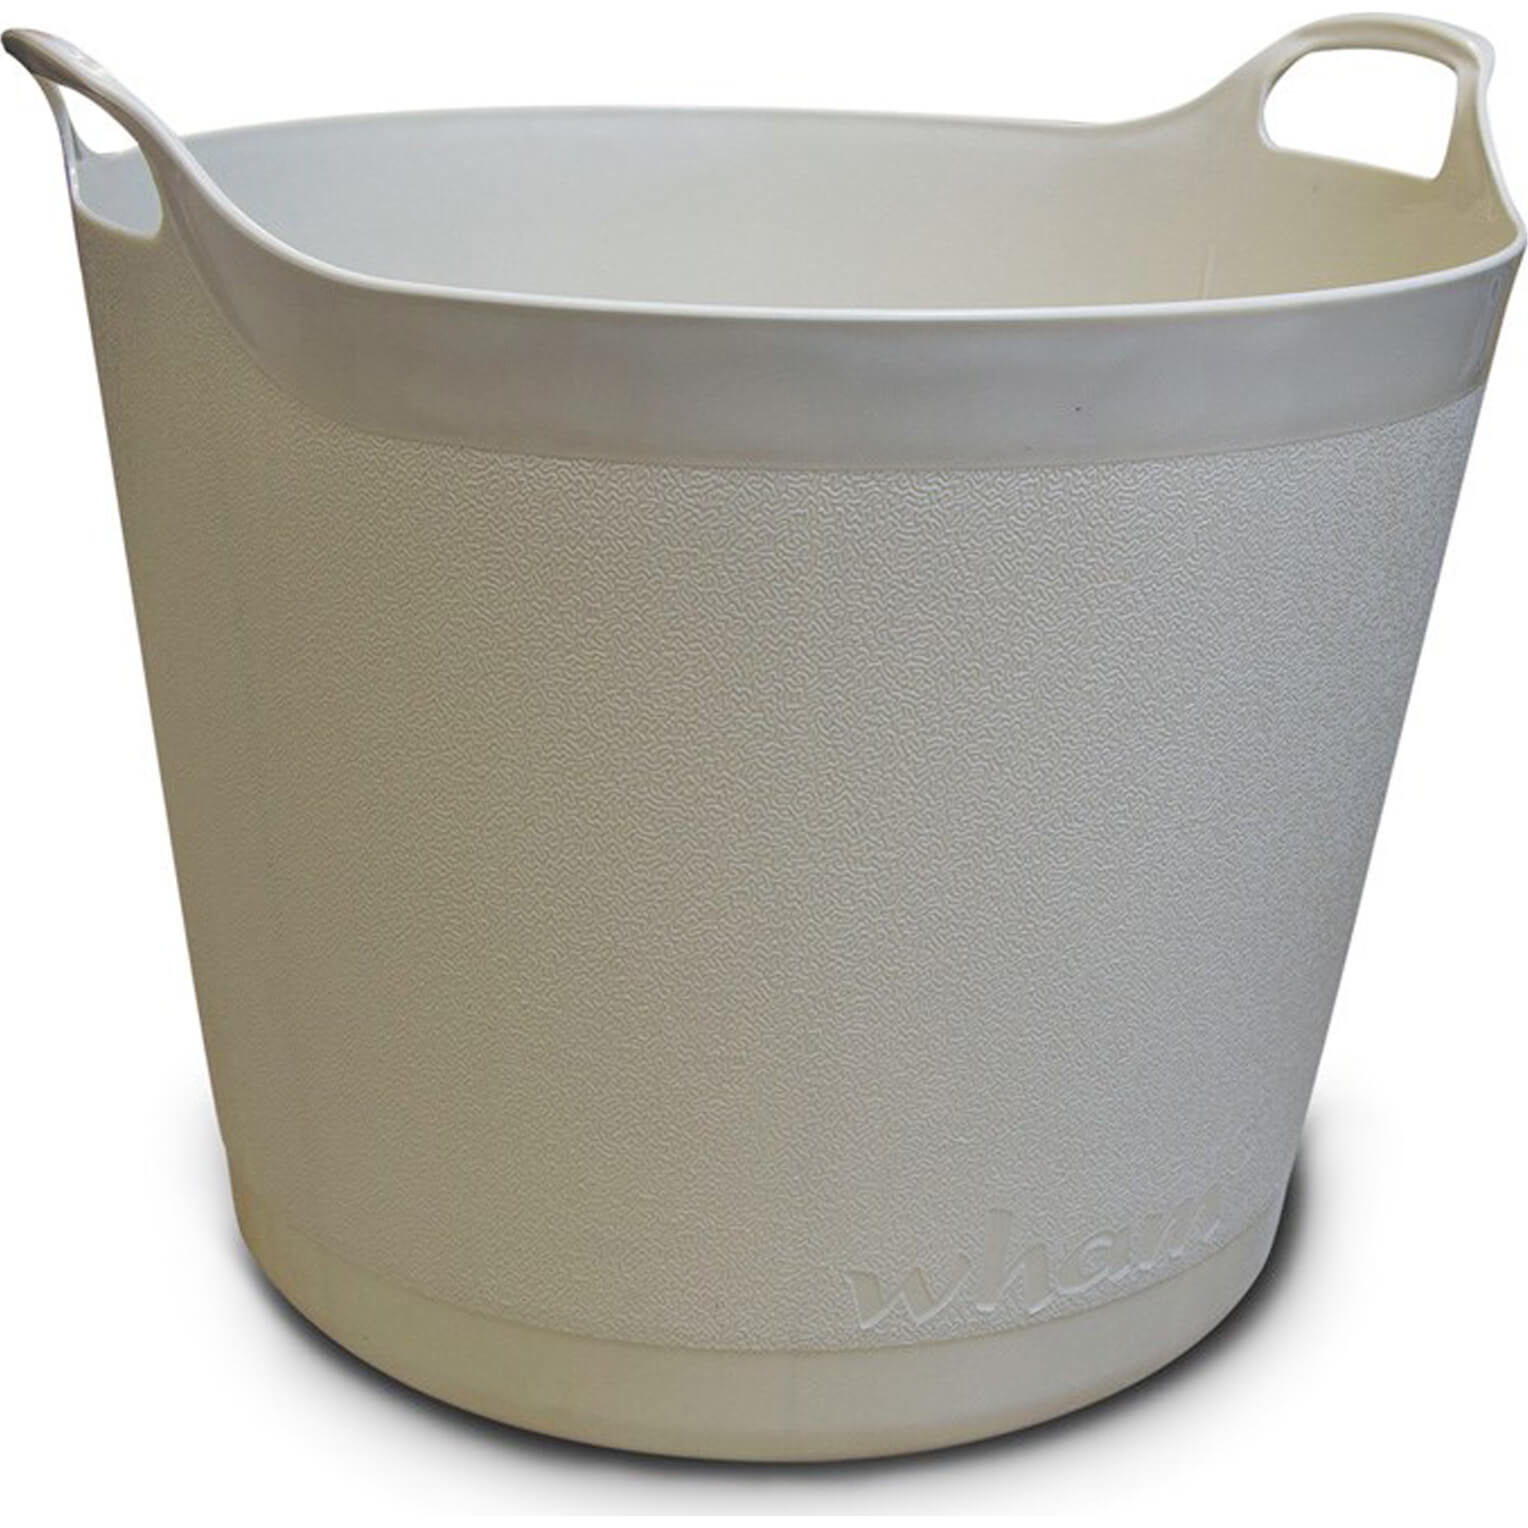 Photos - Tool Box Town and Country Round Flexi Tub Flexible Bucket 40l Grey